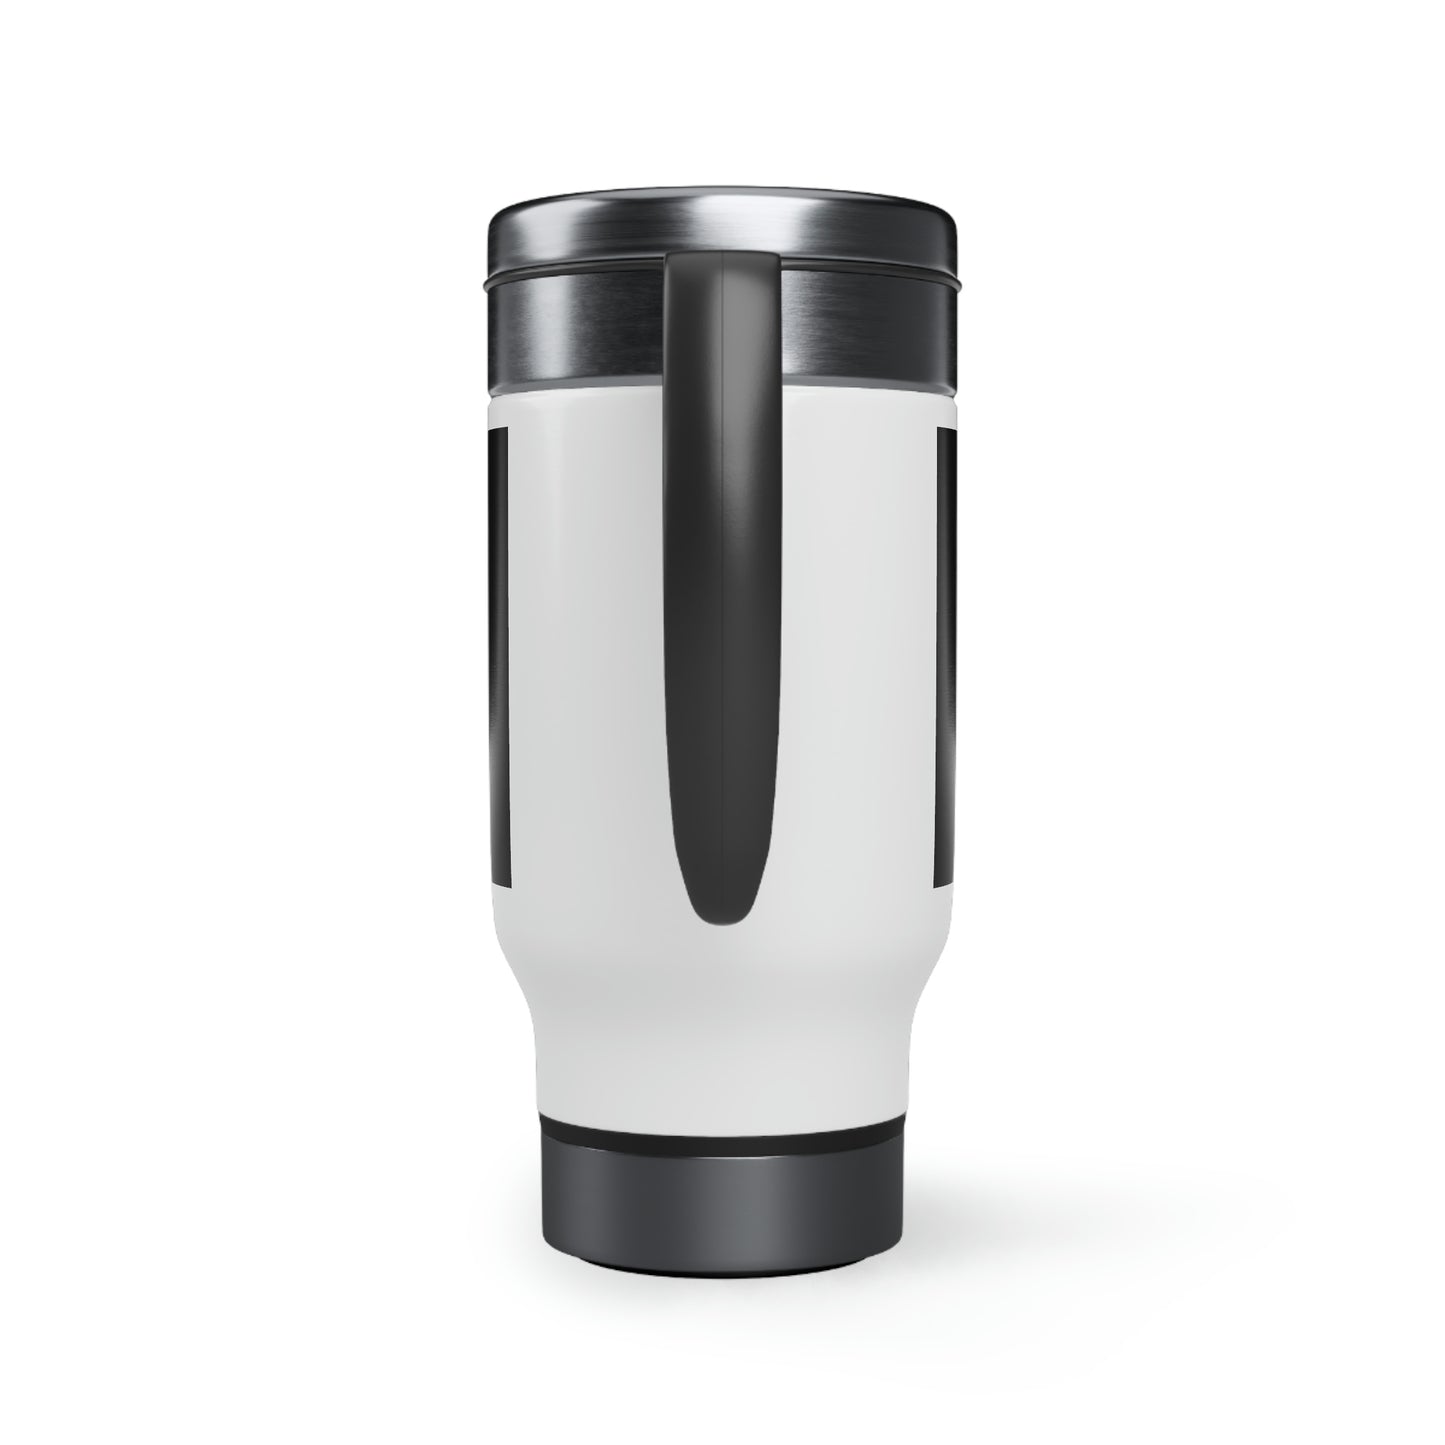 Prayer Changes Outcomes Stainless Steel Travel Mug with Handle, 14oz